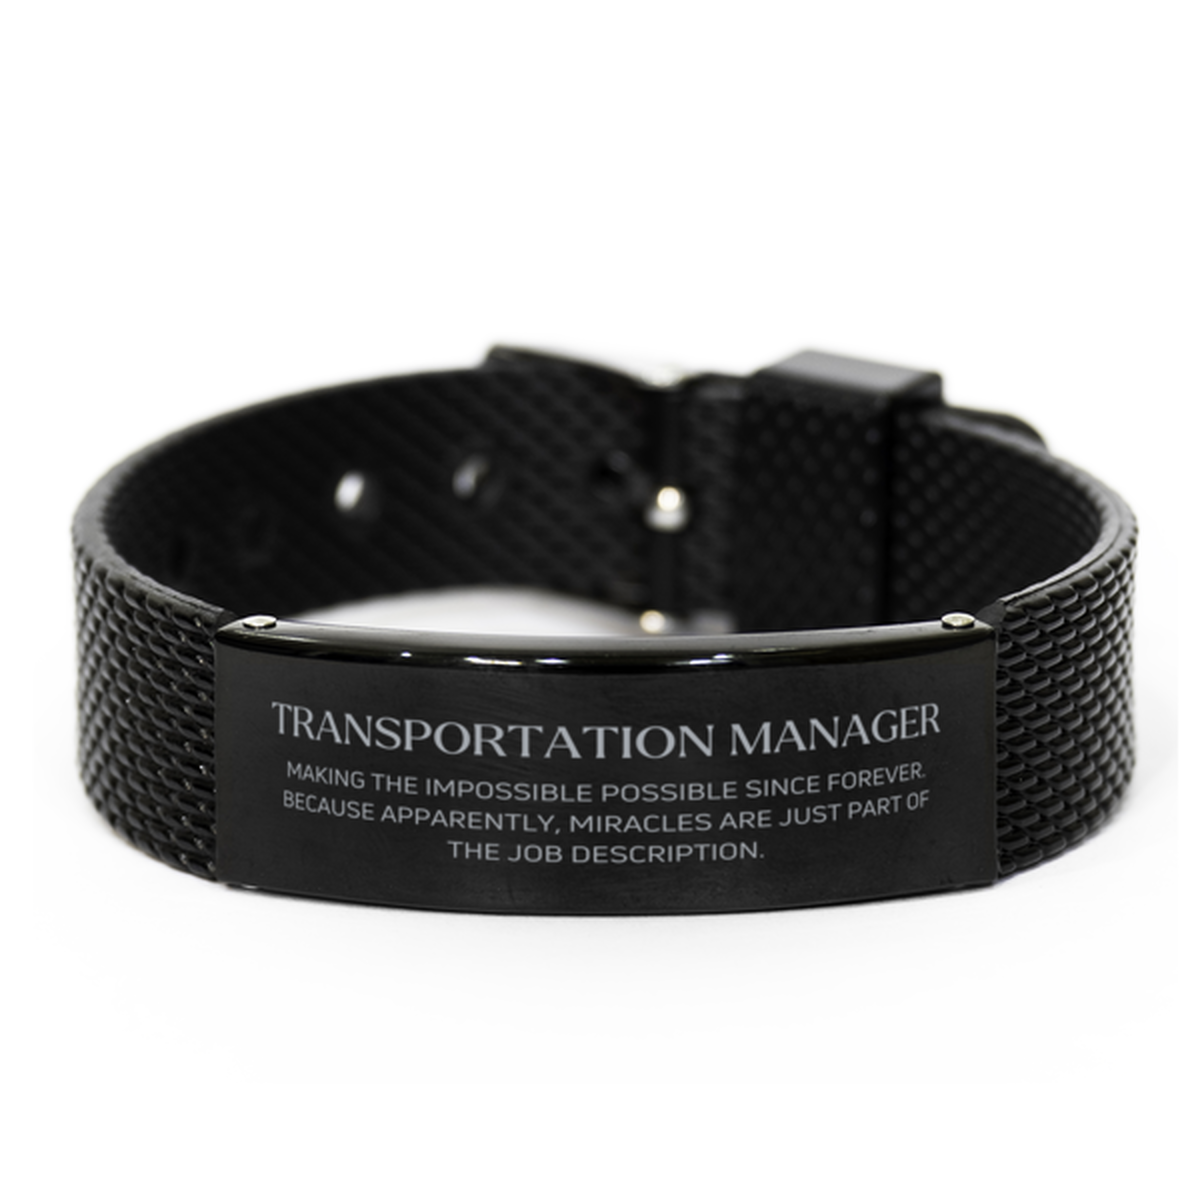 Funny Transportation Manager Gifts, Miracles are just part of the job description, Inspirational Birthday Black Shark Mesh Bracelet For Transportation Manager, Men, Women, Coworkers, Friends, Boss